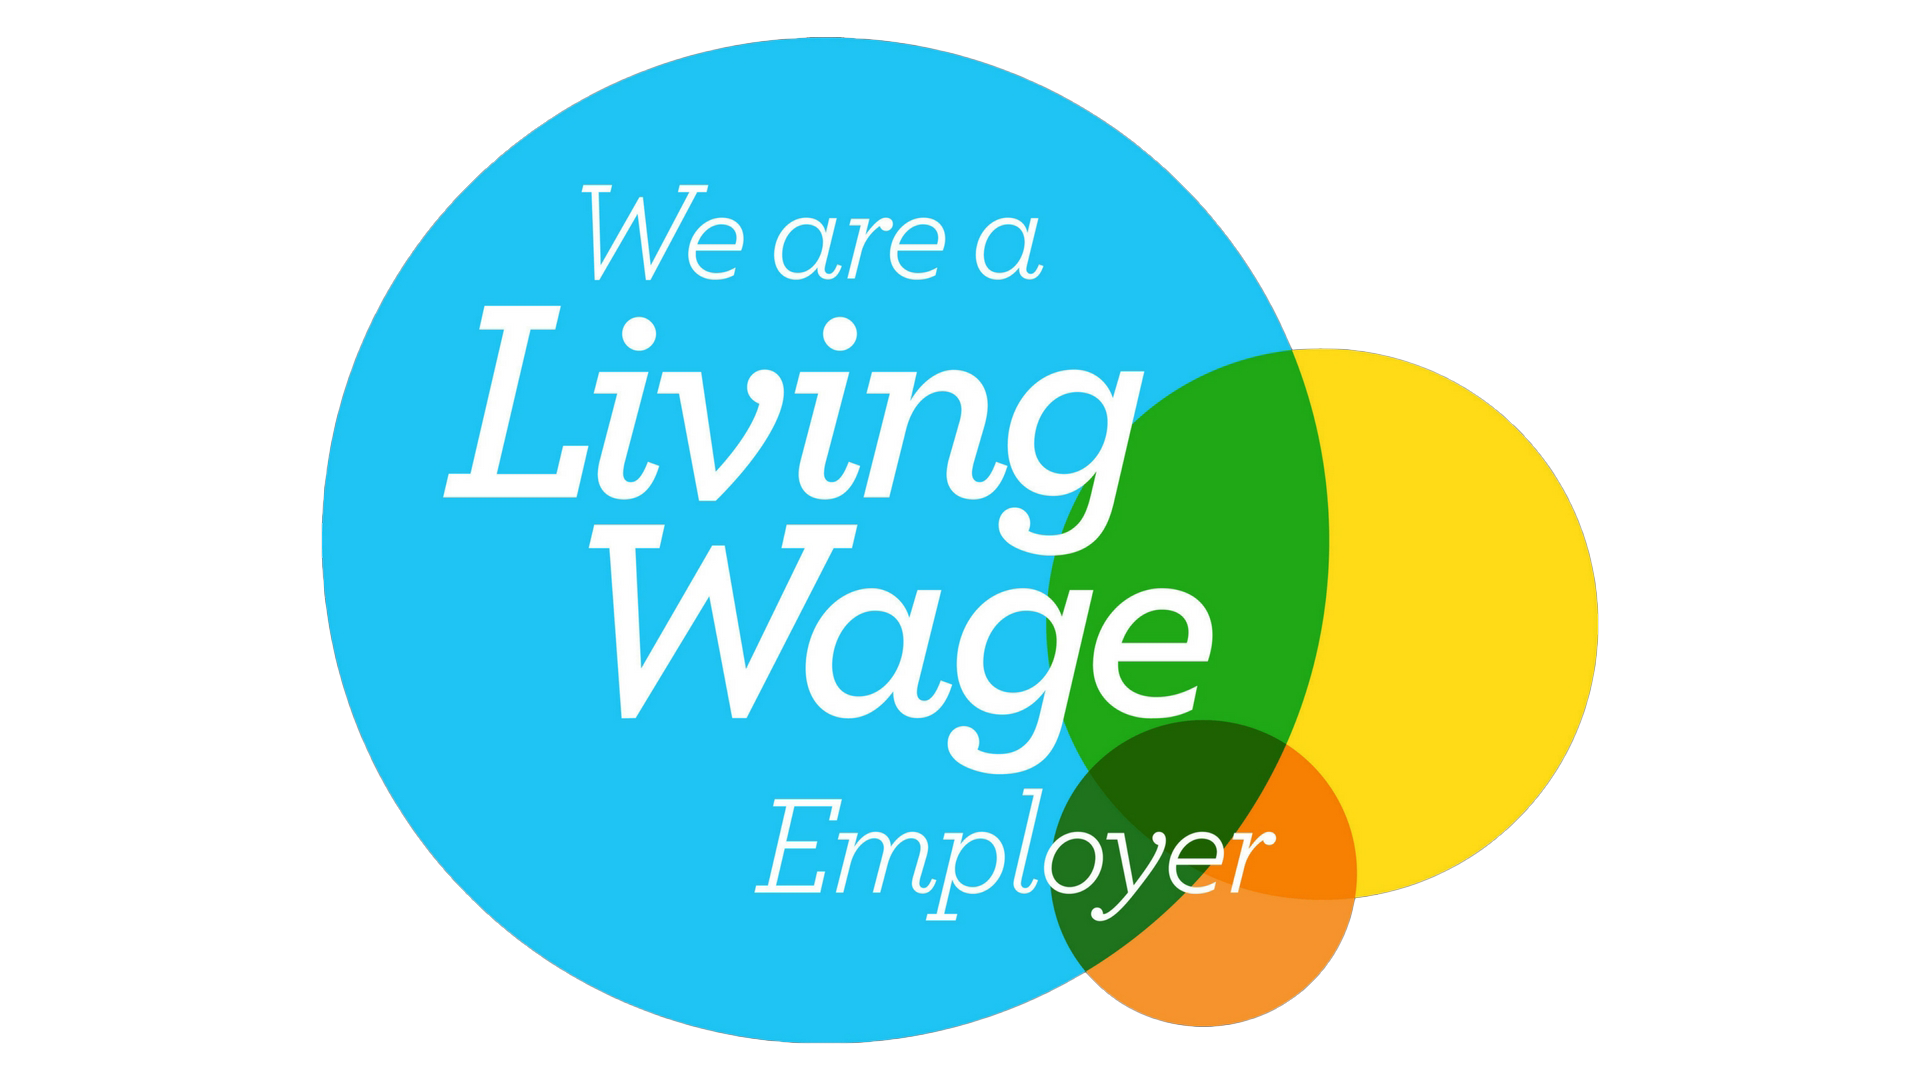 Peocmeter is a member of the living wage foundation